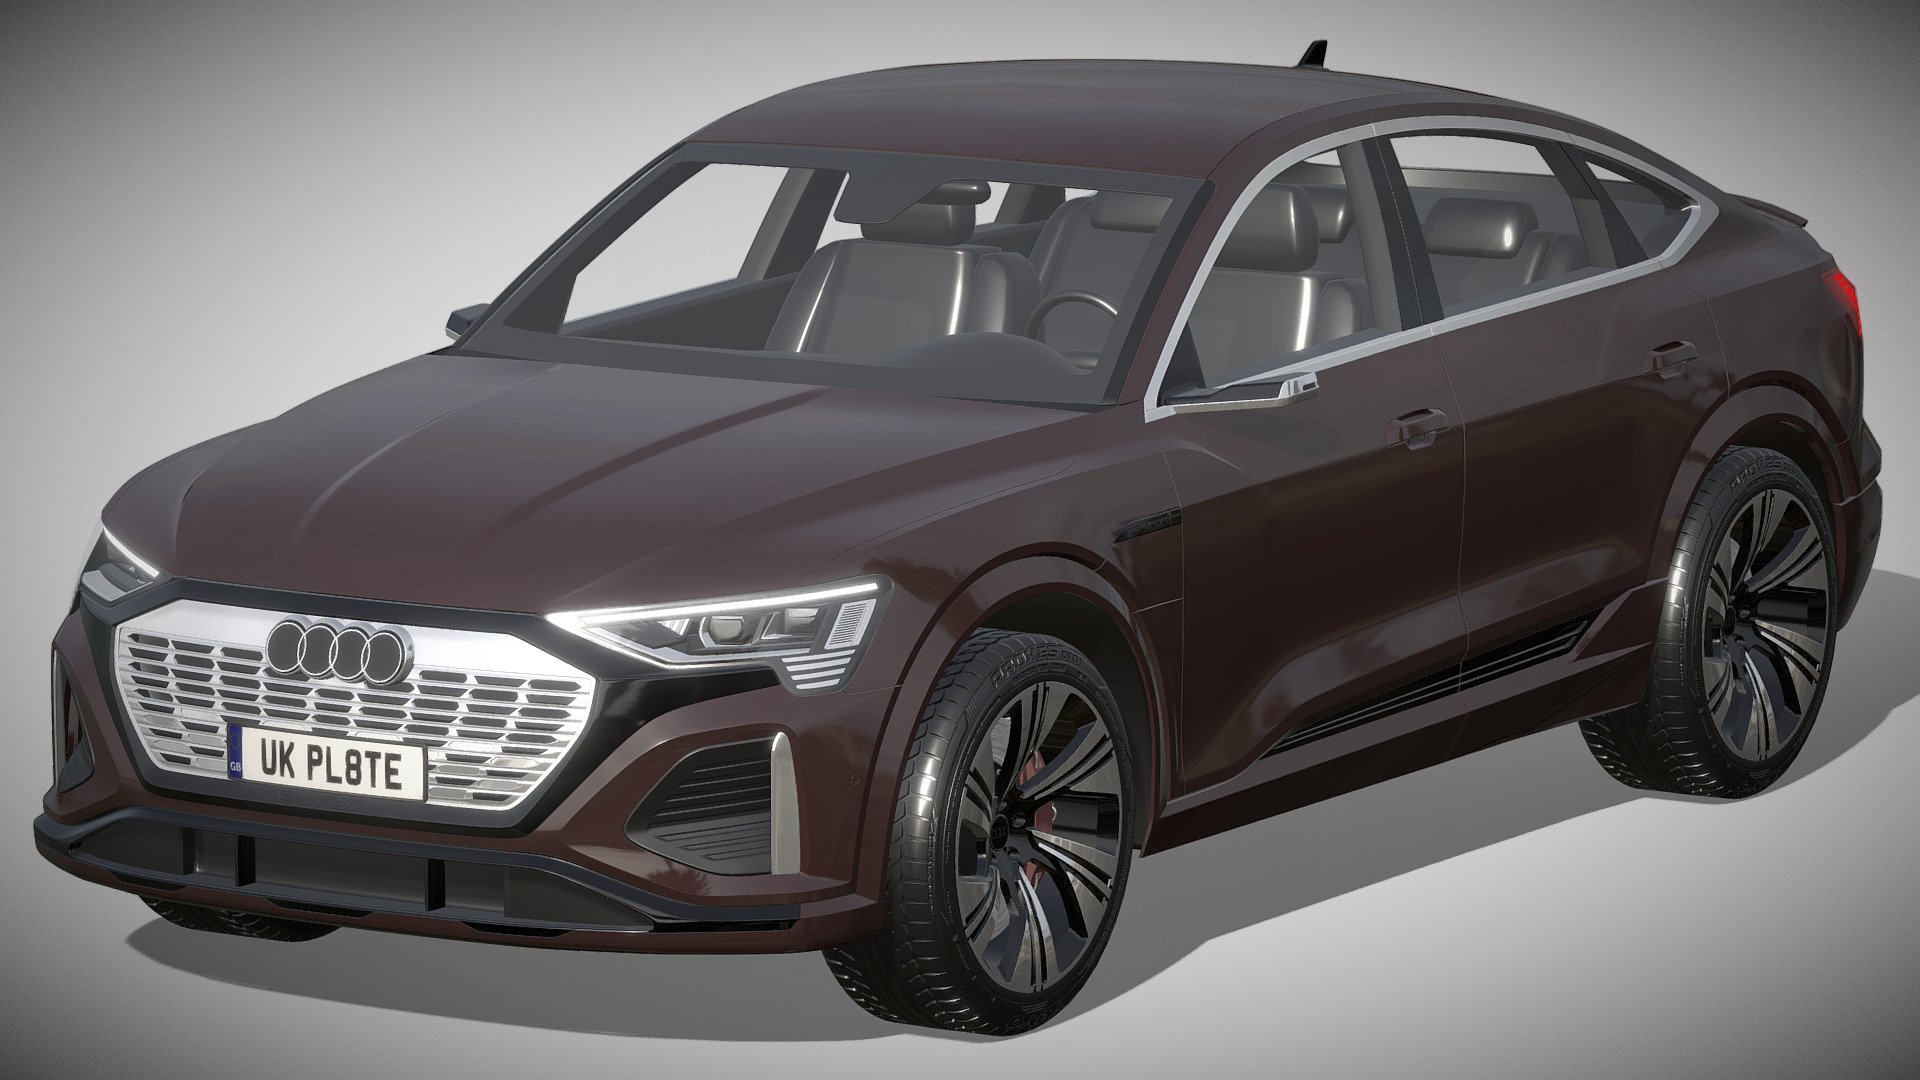 Audi Q8 Sportback e-tron

https://www.audi.de/de/brand/de/neuwagen/q8-e-tron/q8-sportback-e-tron.html

Clean geometry Light weight model, yet completely detailed for HI-Res renders. Use for movies, Advertisements or games

Corona render and materials

All textures include in *.rar files

Lighting setup is not included in the file! - Audi Q8 Sportback e-tron - Buy Royalty Free 3D model by zifir3d 3d model